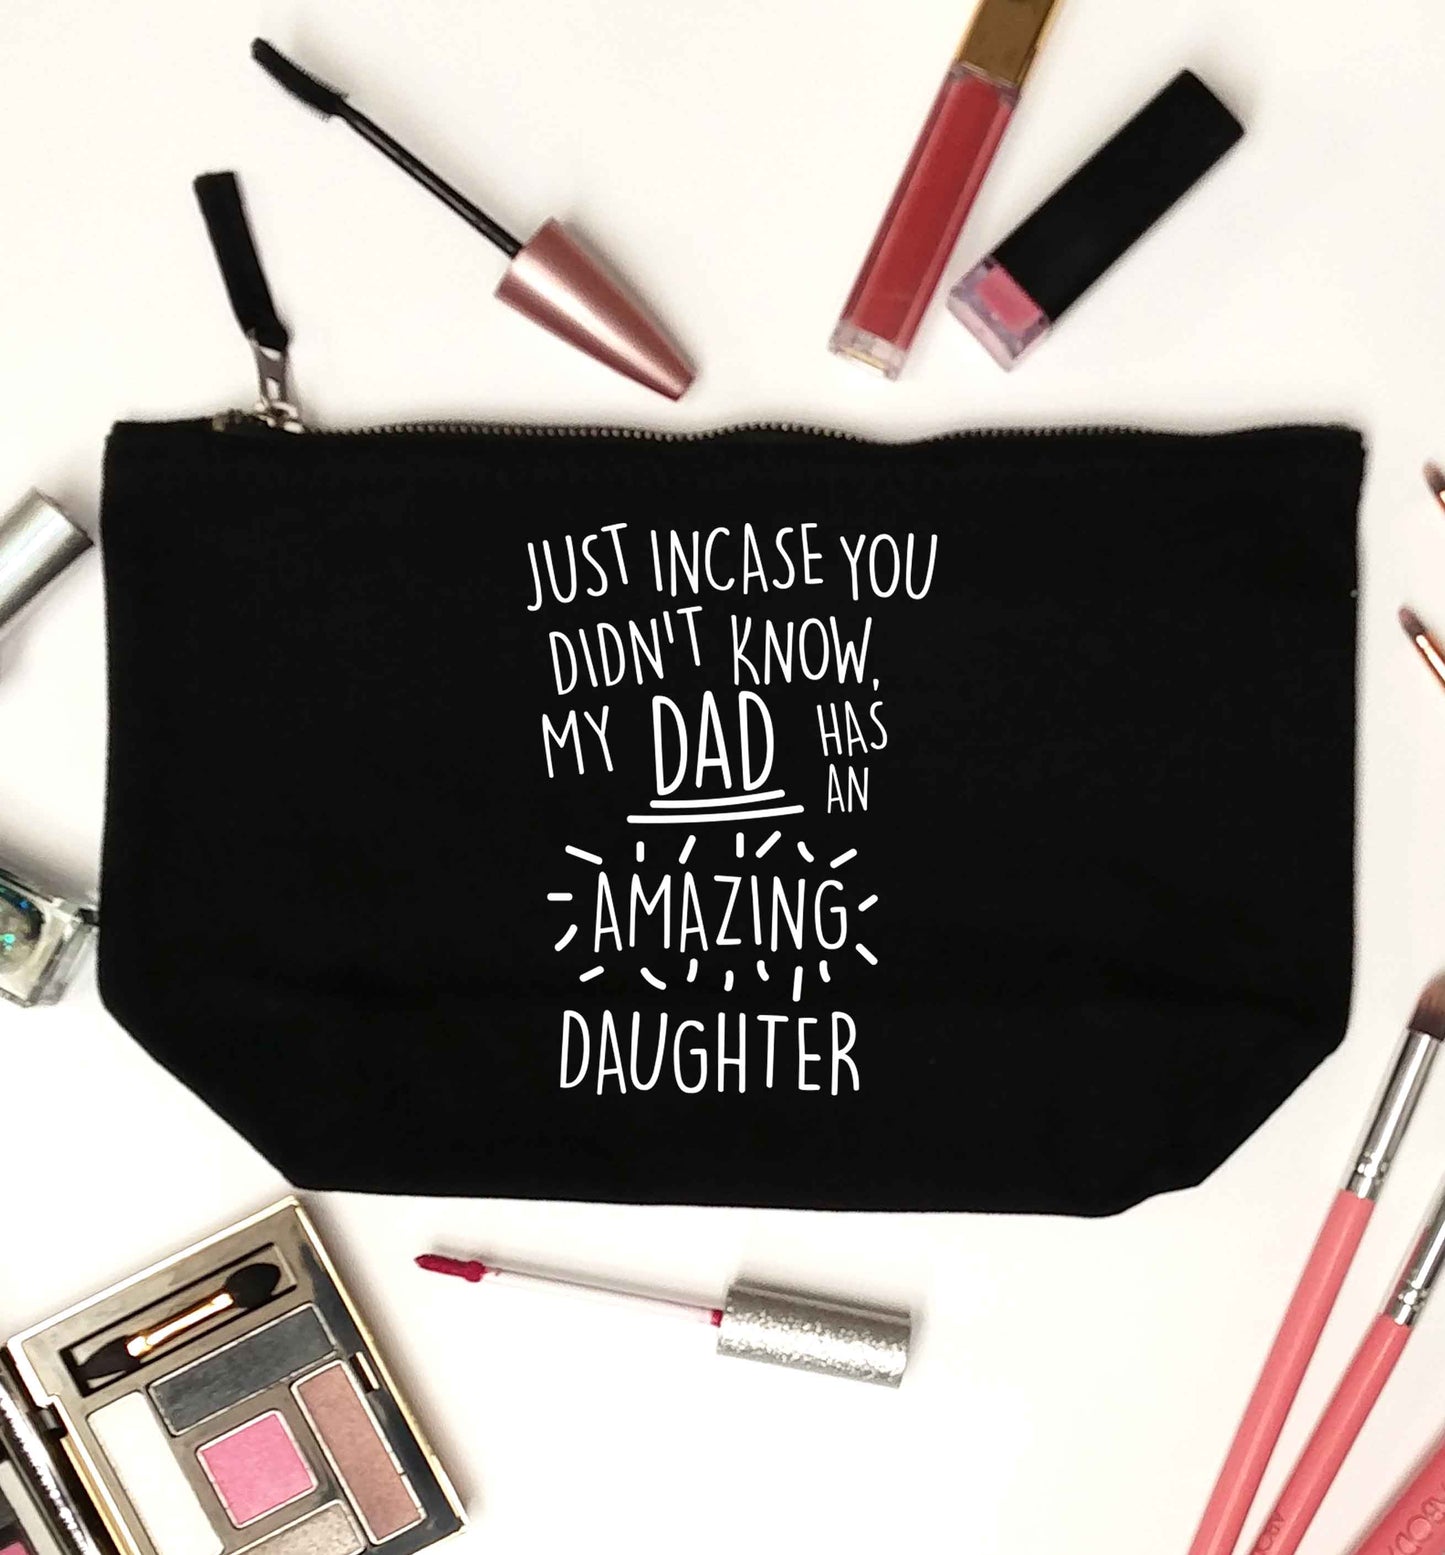 Just incase you didn't know my dad has an amazing daughter black makeup bag